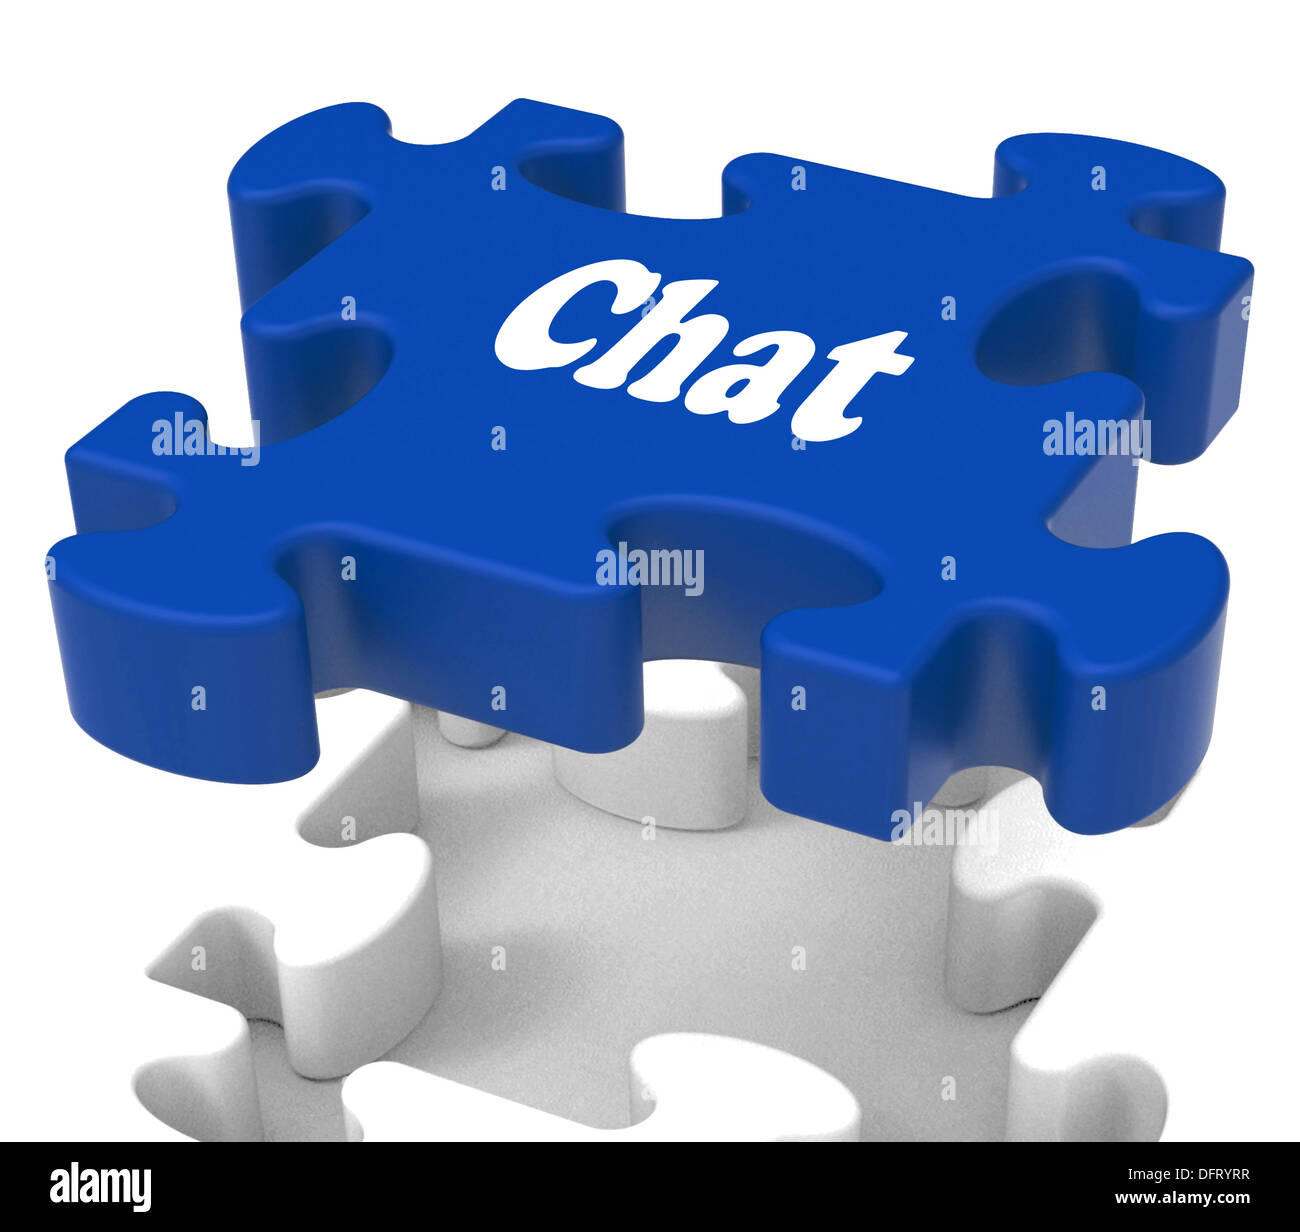 Chat Jigsaw Showing Talking Chatting Typing Or Texting Stock Photo Alamy